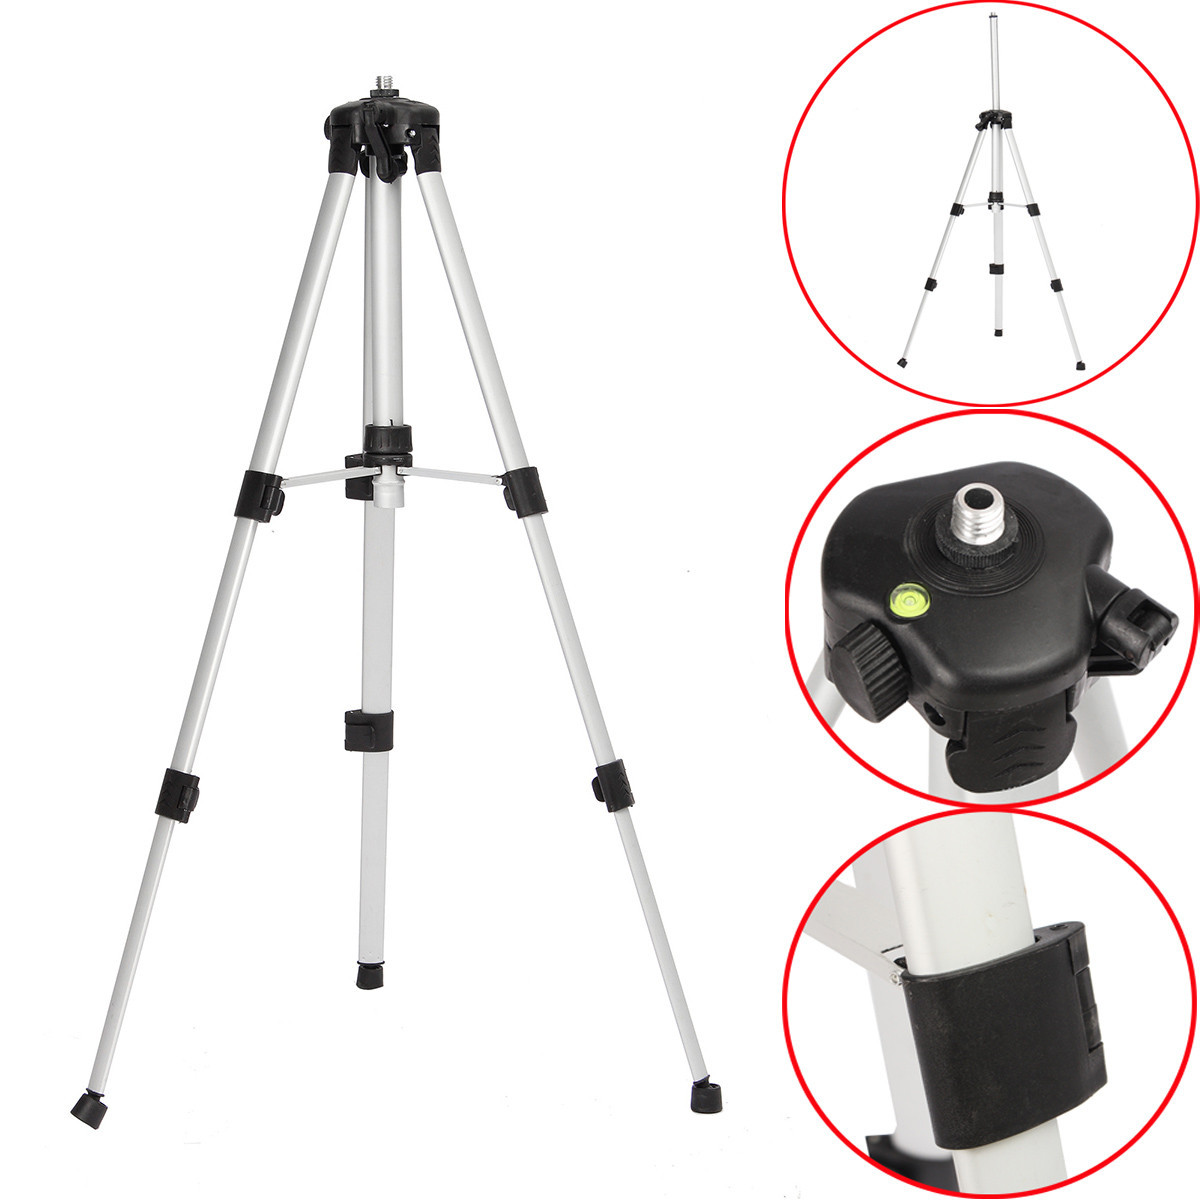 12M-Tripod-Level-Stand-for-Automatic-Self-Leveling-Laser-Level-Measurement-Tool-1131120-7